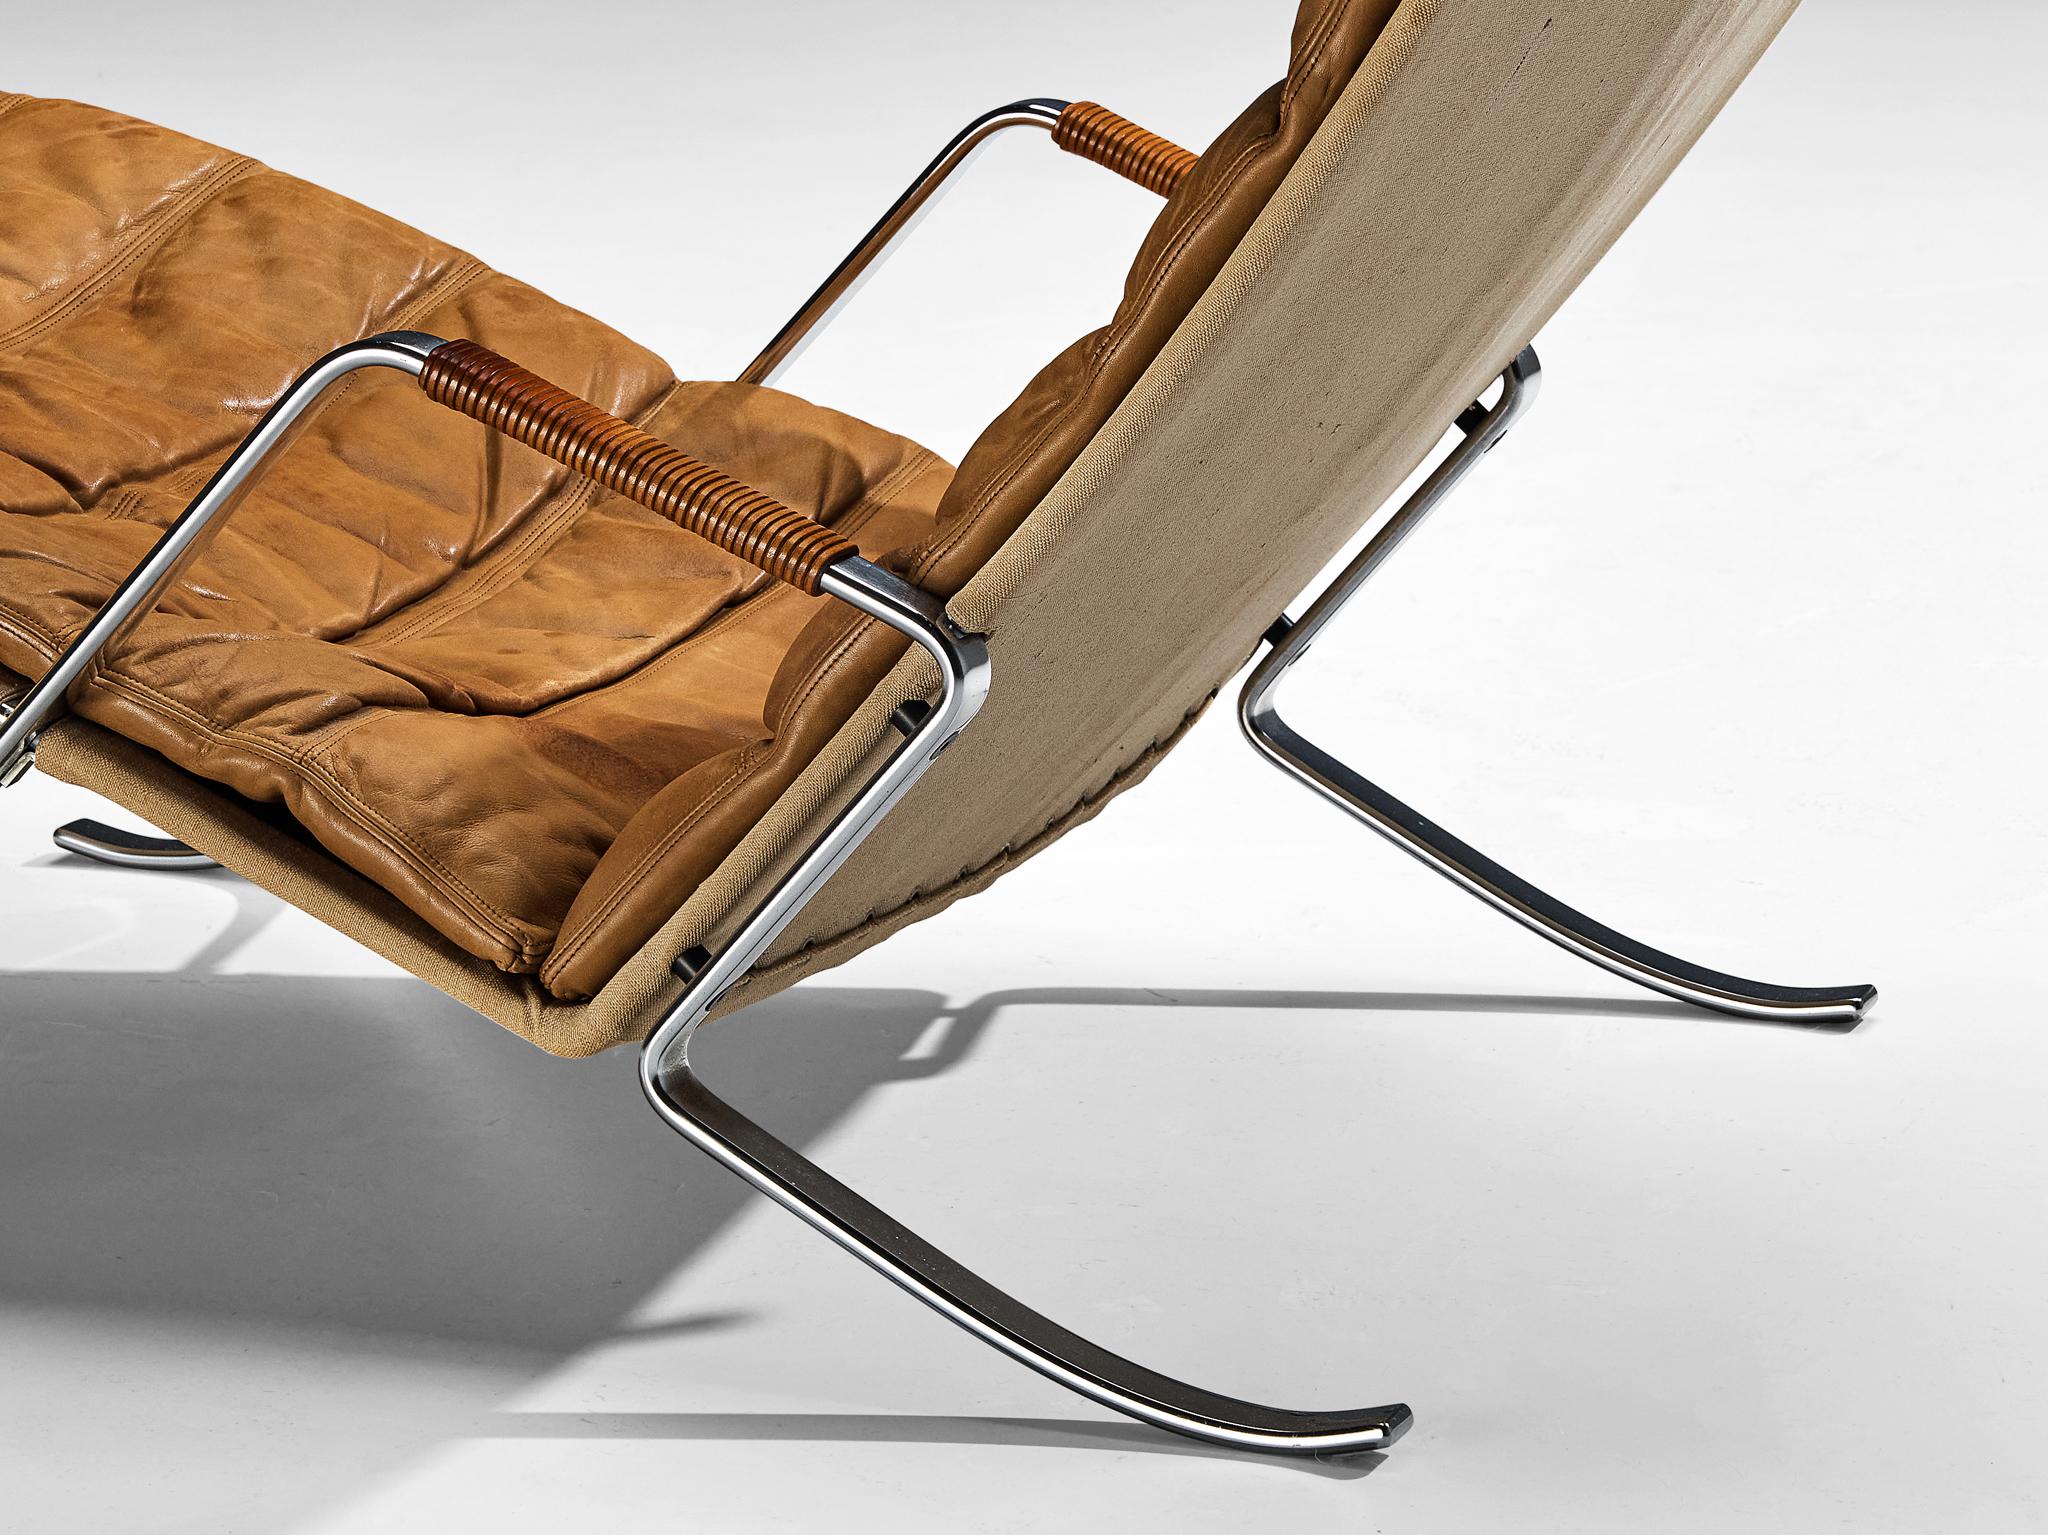 Kastholm & Fabricius Early 'Grasshopper' Lounge Chair in Cognac Leather 1